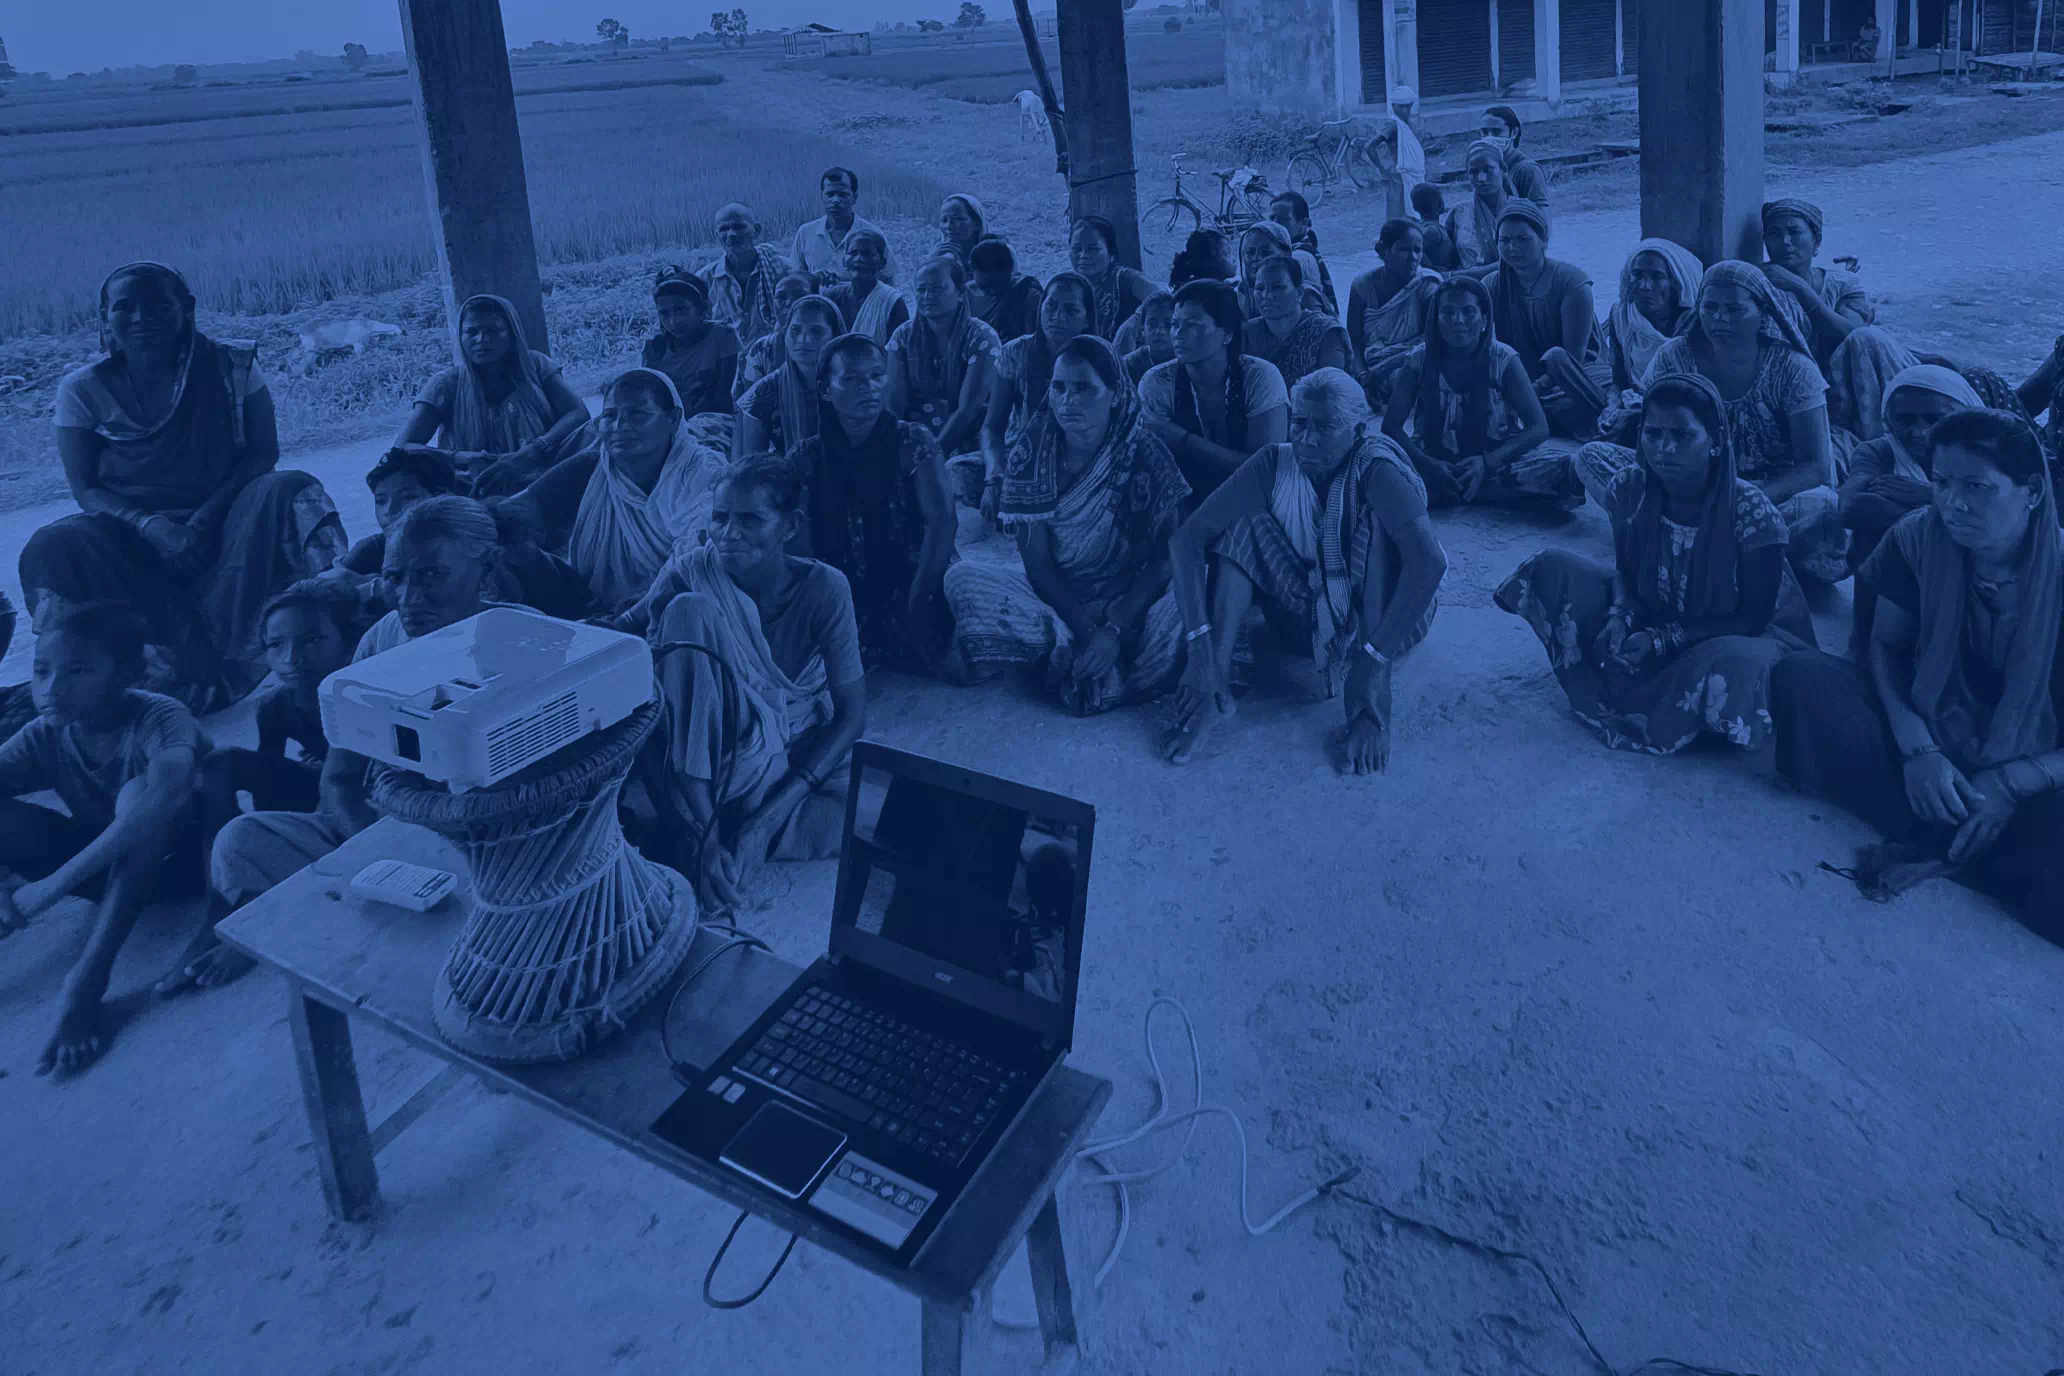 Farmers of rural Nepal gathered around a projector